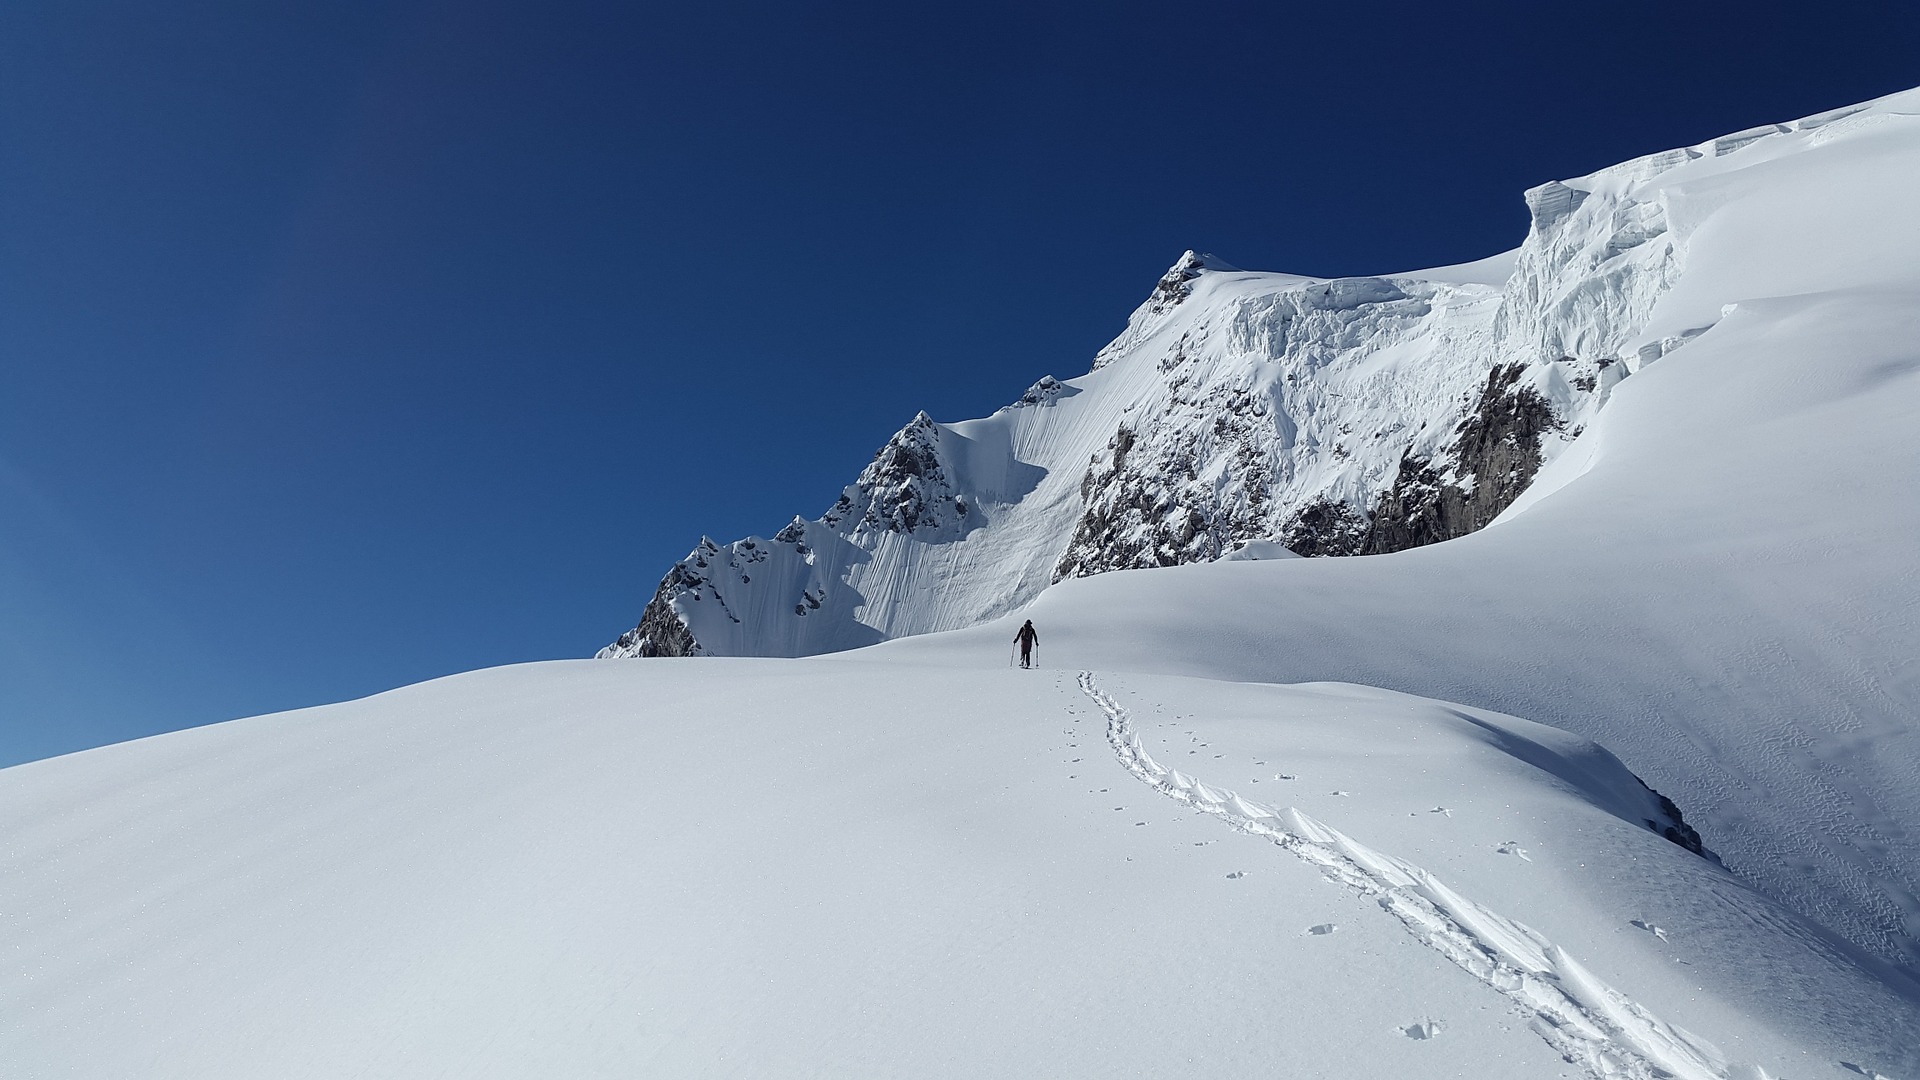 How to start backcountry skiing - photo of a skier deep in the backcountry